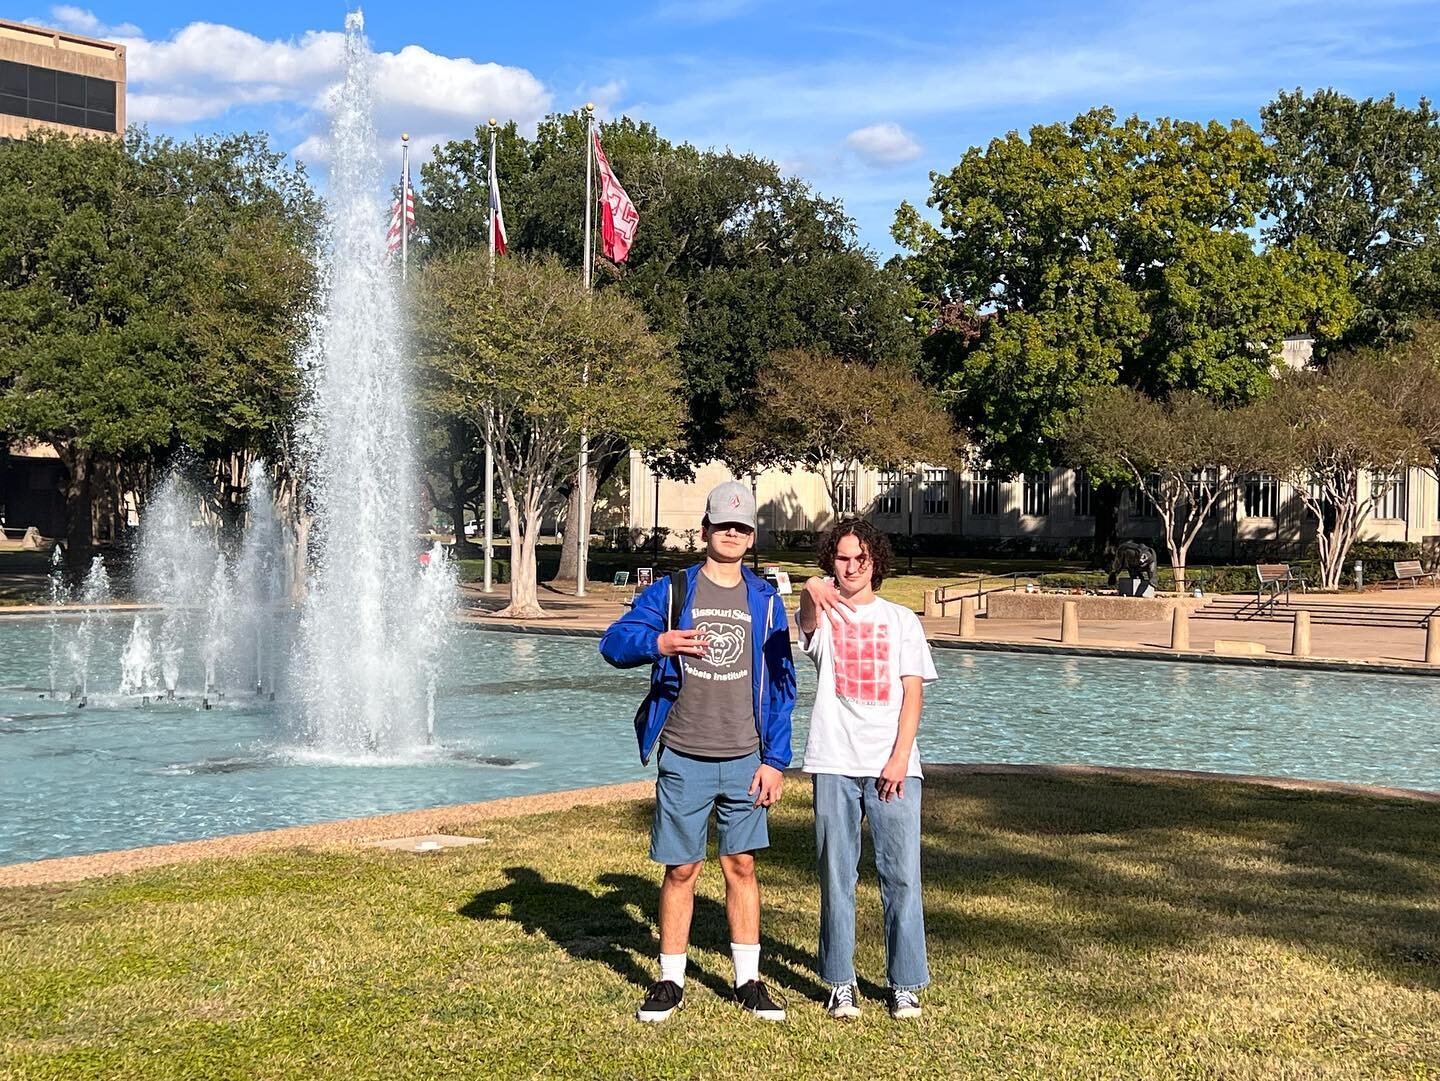 Nat circuit travel is back! Three cheers for our policy debaters for an excellent showing at the University of Houston Cougar Classic last weekend. 

Not pictured: the University&rsquo;s cougar statue whose nose may or may not have gotten picked by a